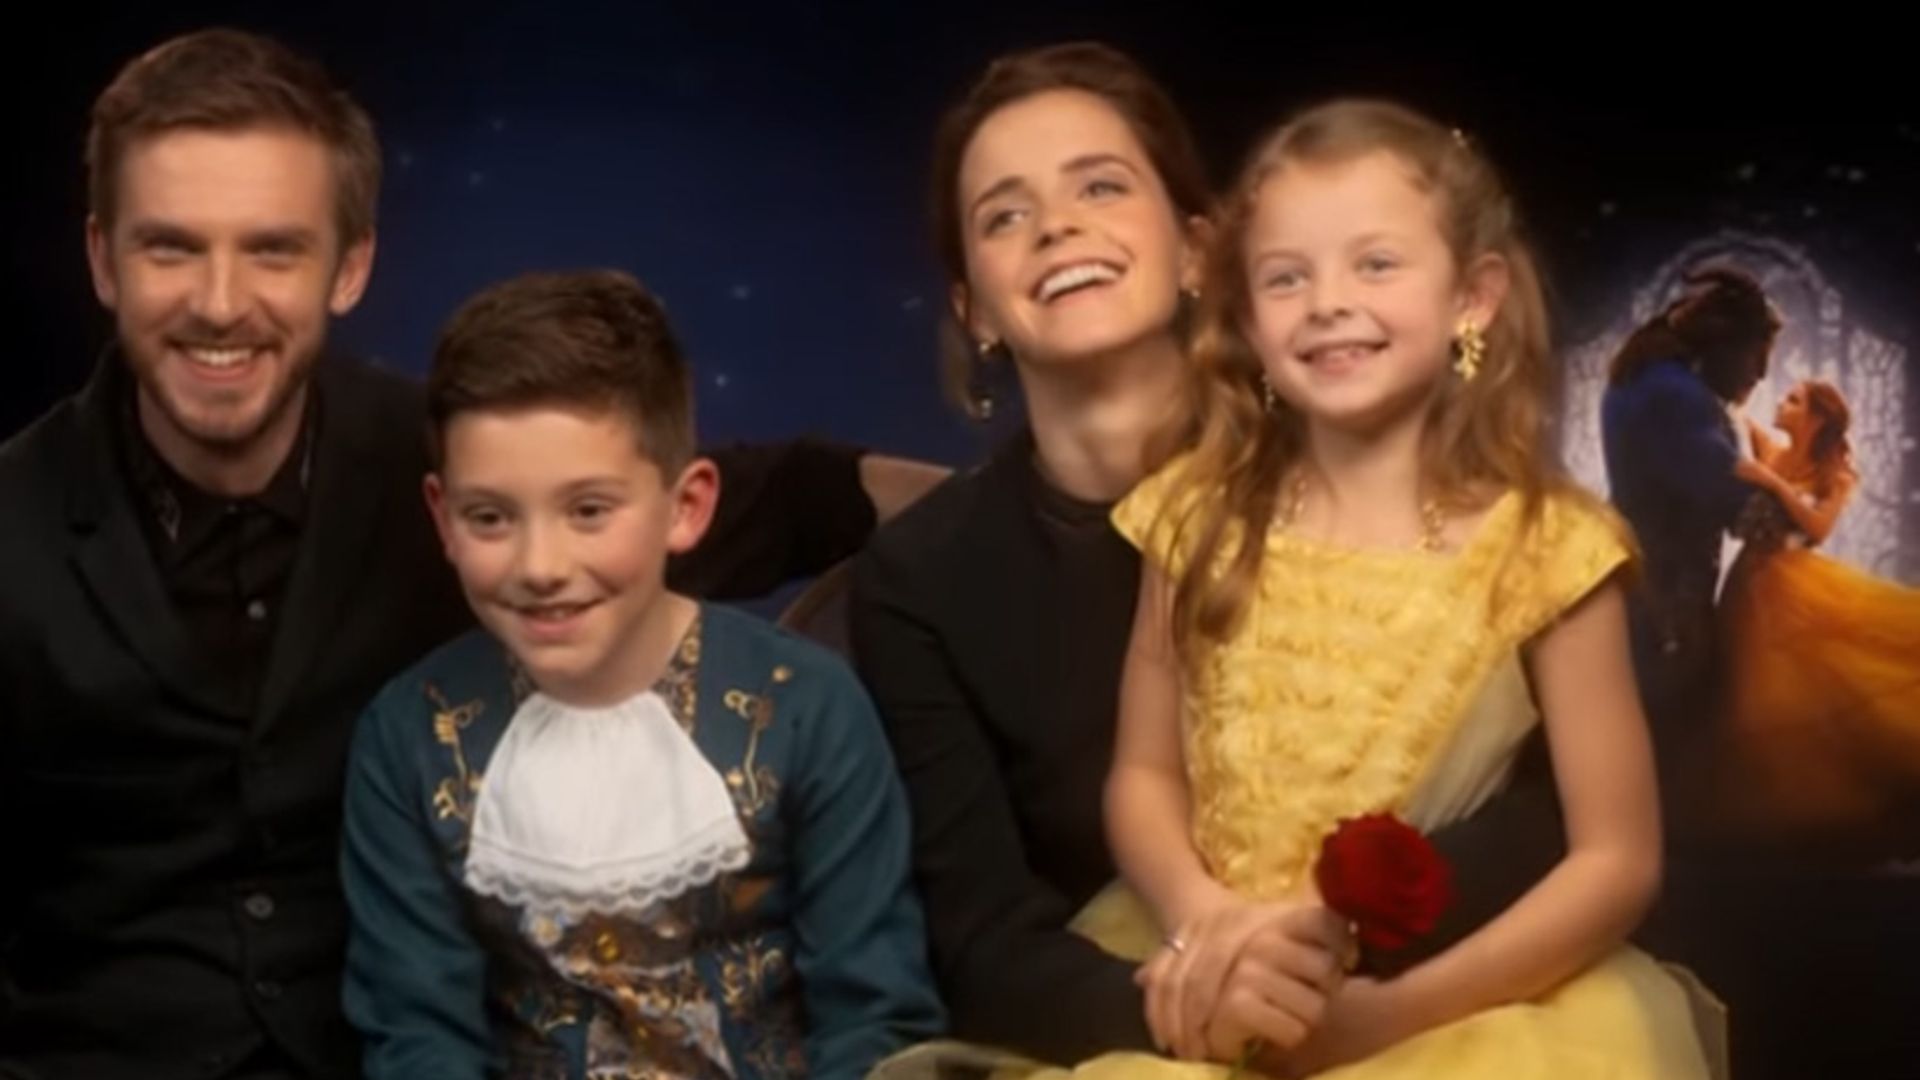 Mini Beauty and the Beast meet adult Belle and the Beast: see the video